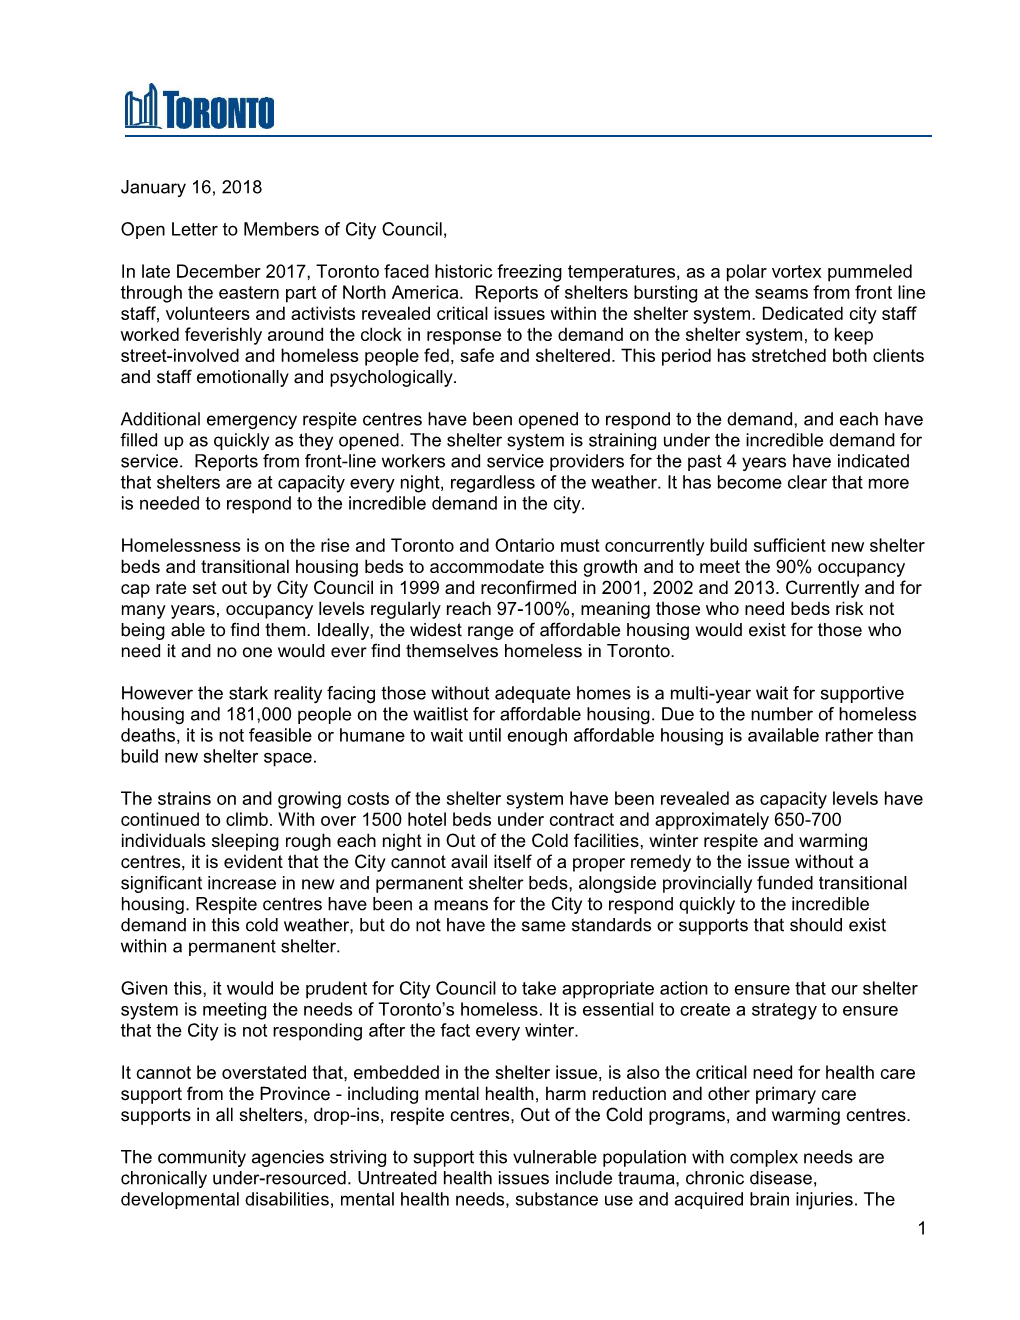 1 January 16, 2018 Open Letter to Members of City Council, in Late December 2017, Toronto Faced Historic Freezing Temperatures